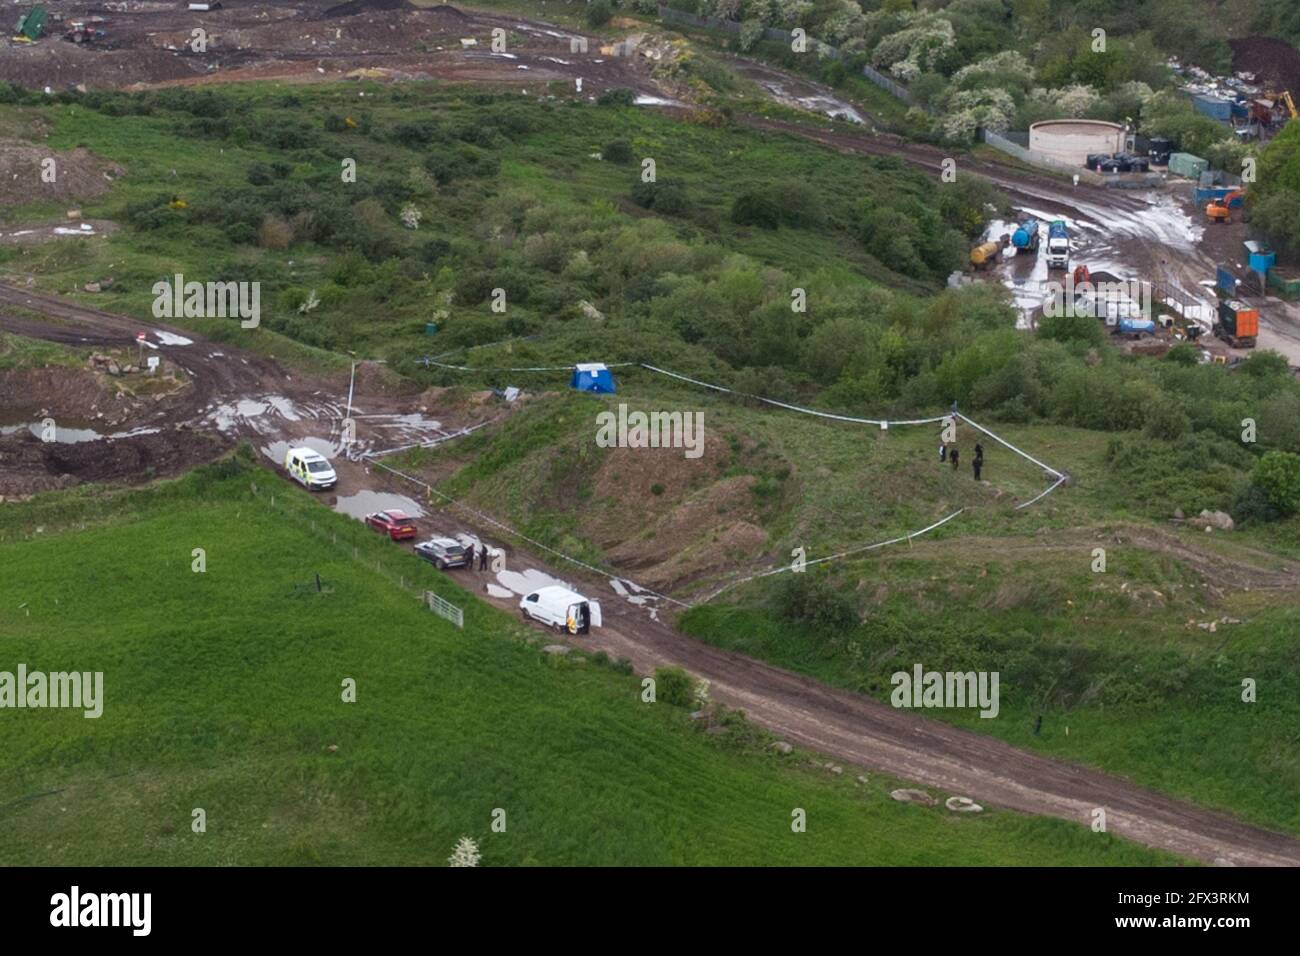 Kingswinford, UK. 25th May, 2021. Aerial views of Himley Quarry Landfill where a poice scene has been set up after a human bone was found. A blue tent is visible along with police vehicles and officers. West Midlands Police are searching the site, on top of a landfill mound after the grim discovery. Pic by Credit: Katie Stewart/Alamy Live News Stock Photo